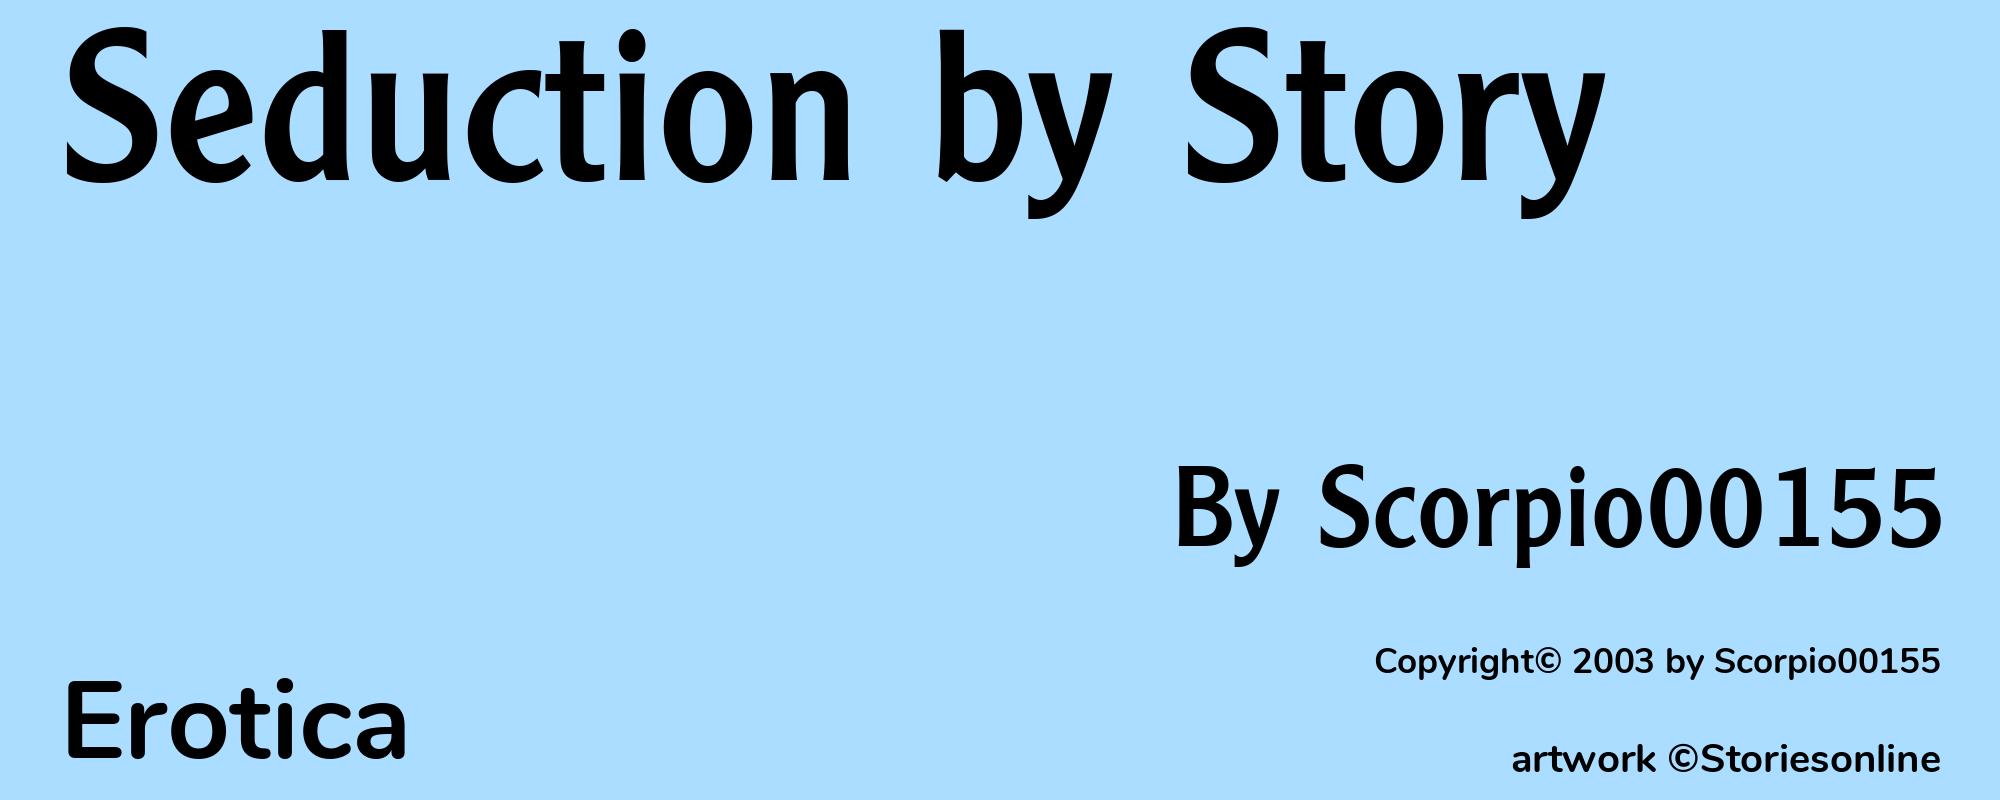 Seduction by Story - Cover